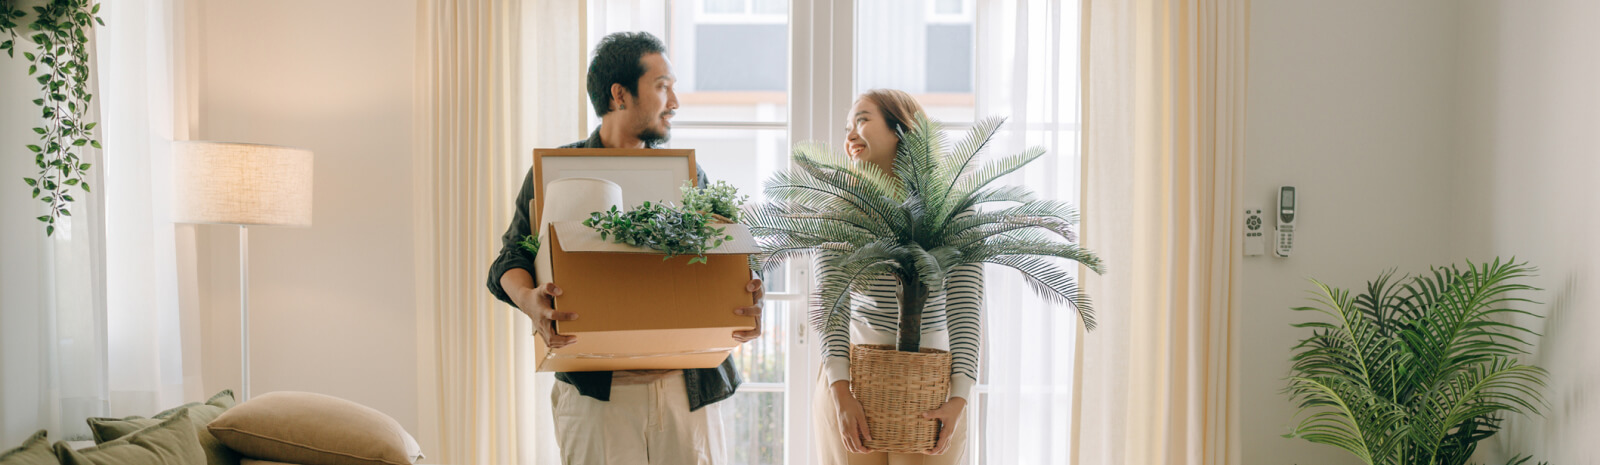 young couple moving boxes and house plants